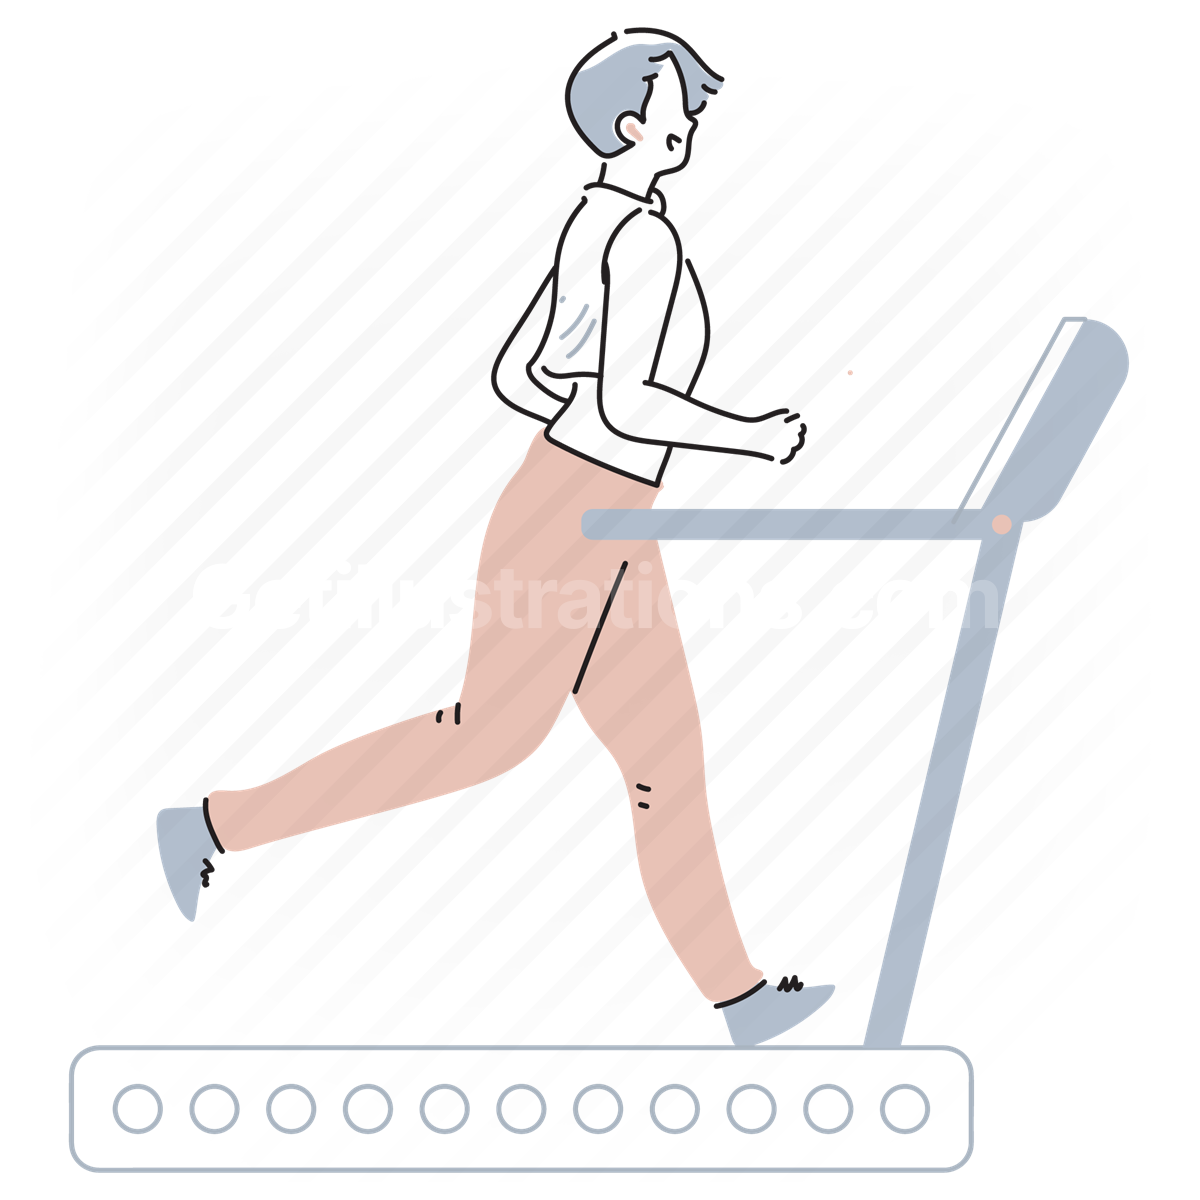 Download treadmill, running, run, workout, health, healthy, fitness- Basic  ink illustrations